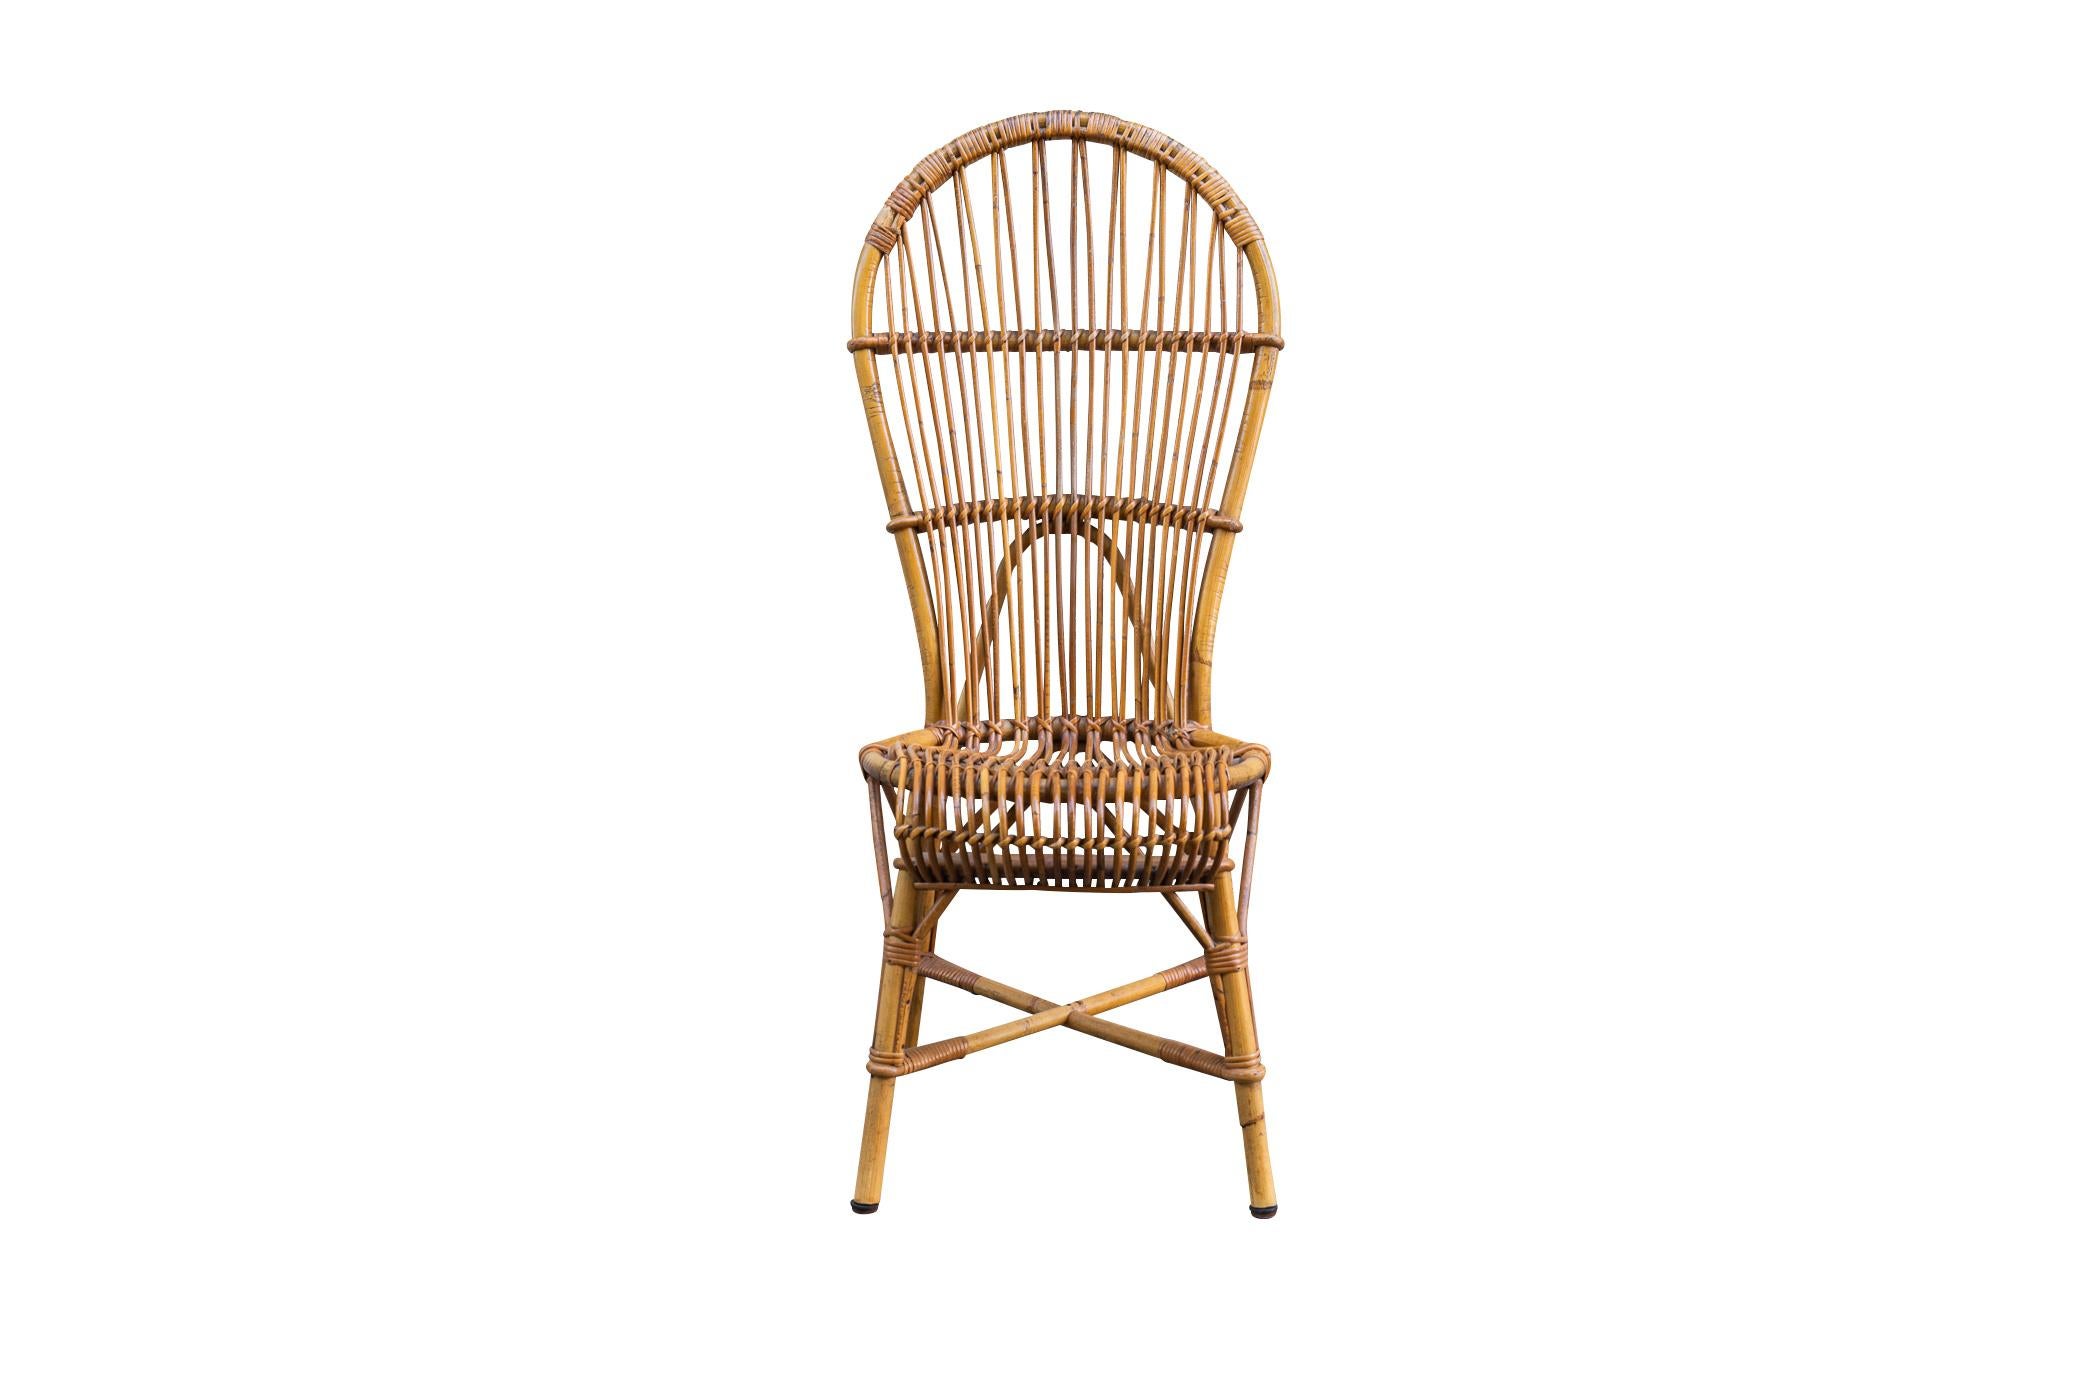 Audoux-Minet, 
Set of six rattan chairs, 
Label at the back,
France, circa 1960.

Measures: 50 x 42 x 105 cm.

Audoux-Minet was a furniture maker specialized in rattan, bamboo and ropes. In the 1940s and 1950s, French couple Adrien Audoux and Frida